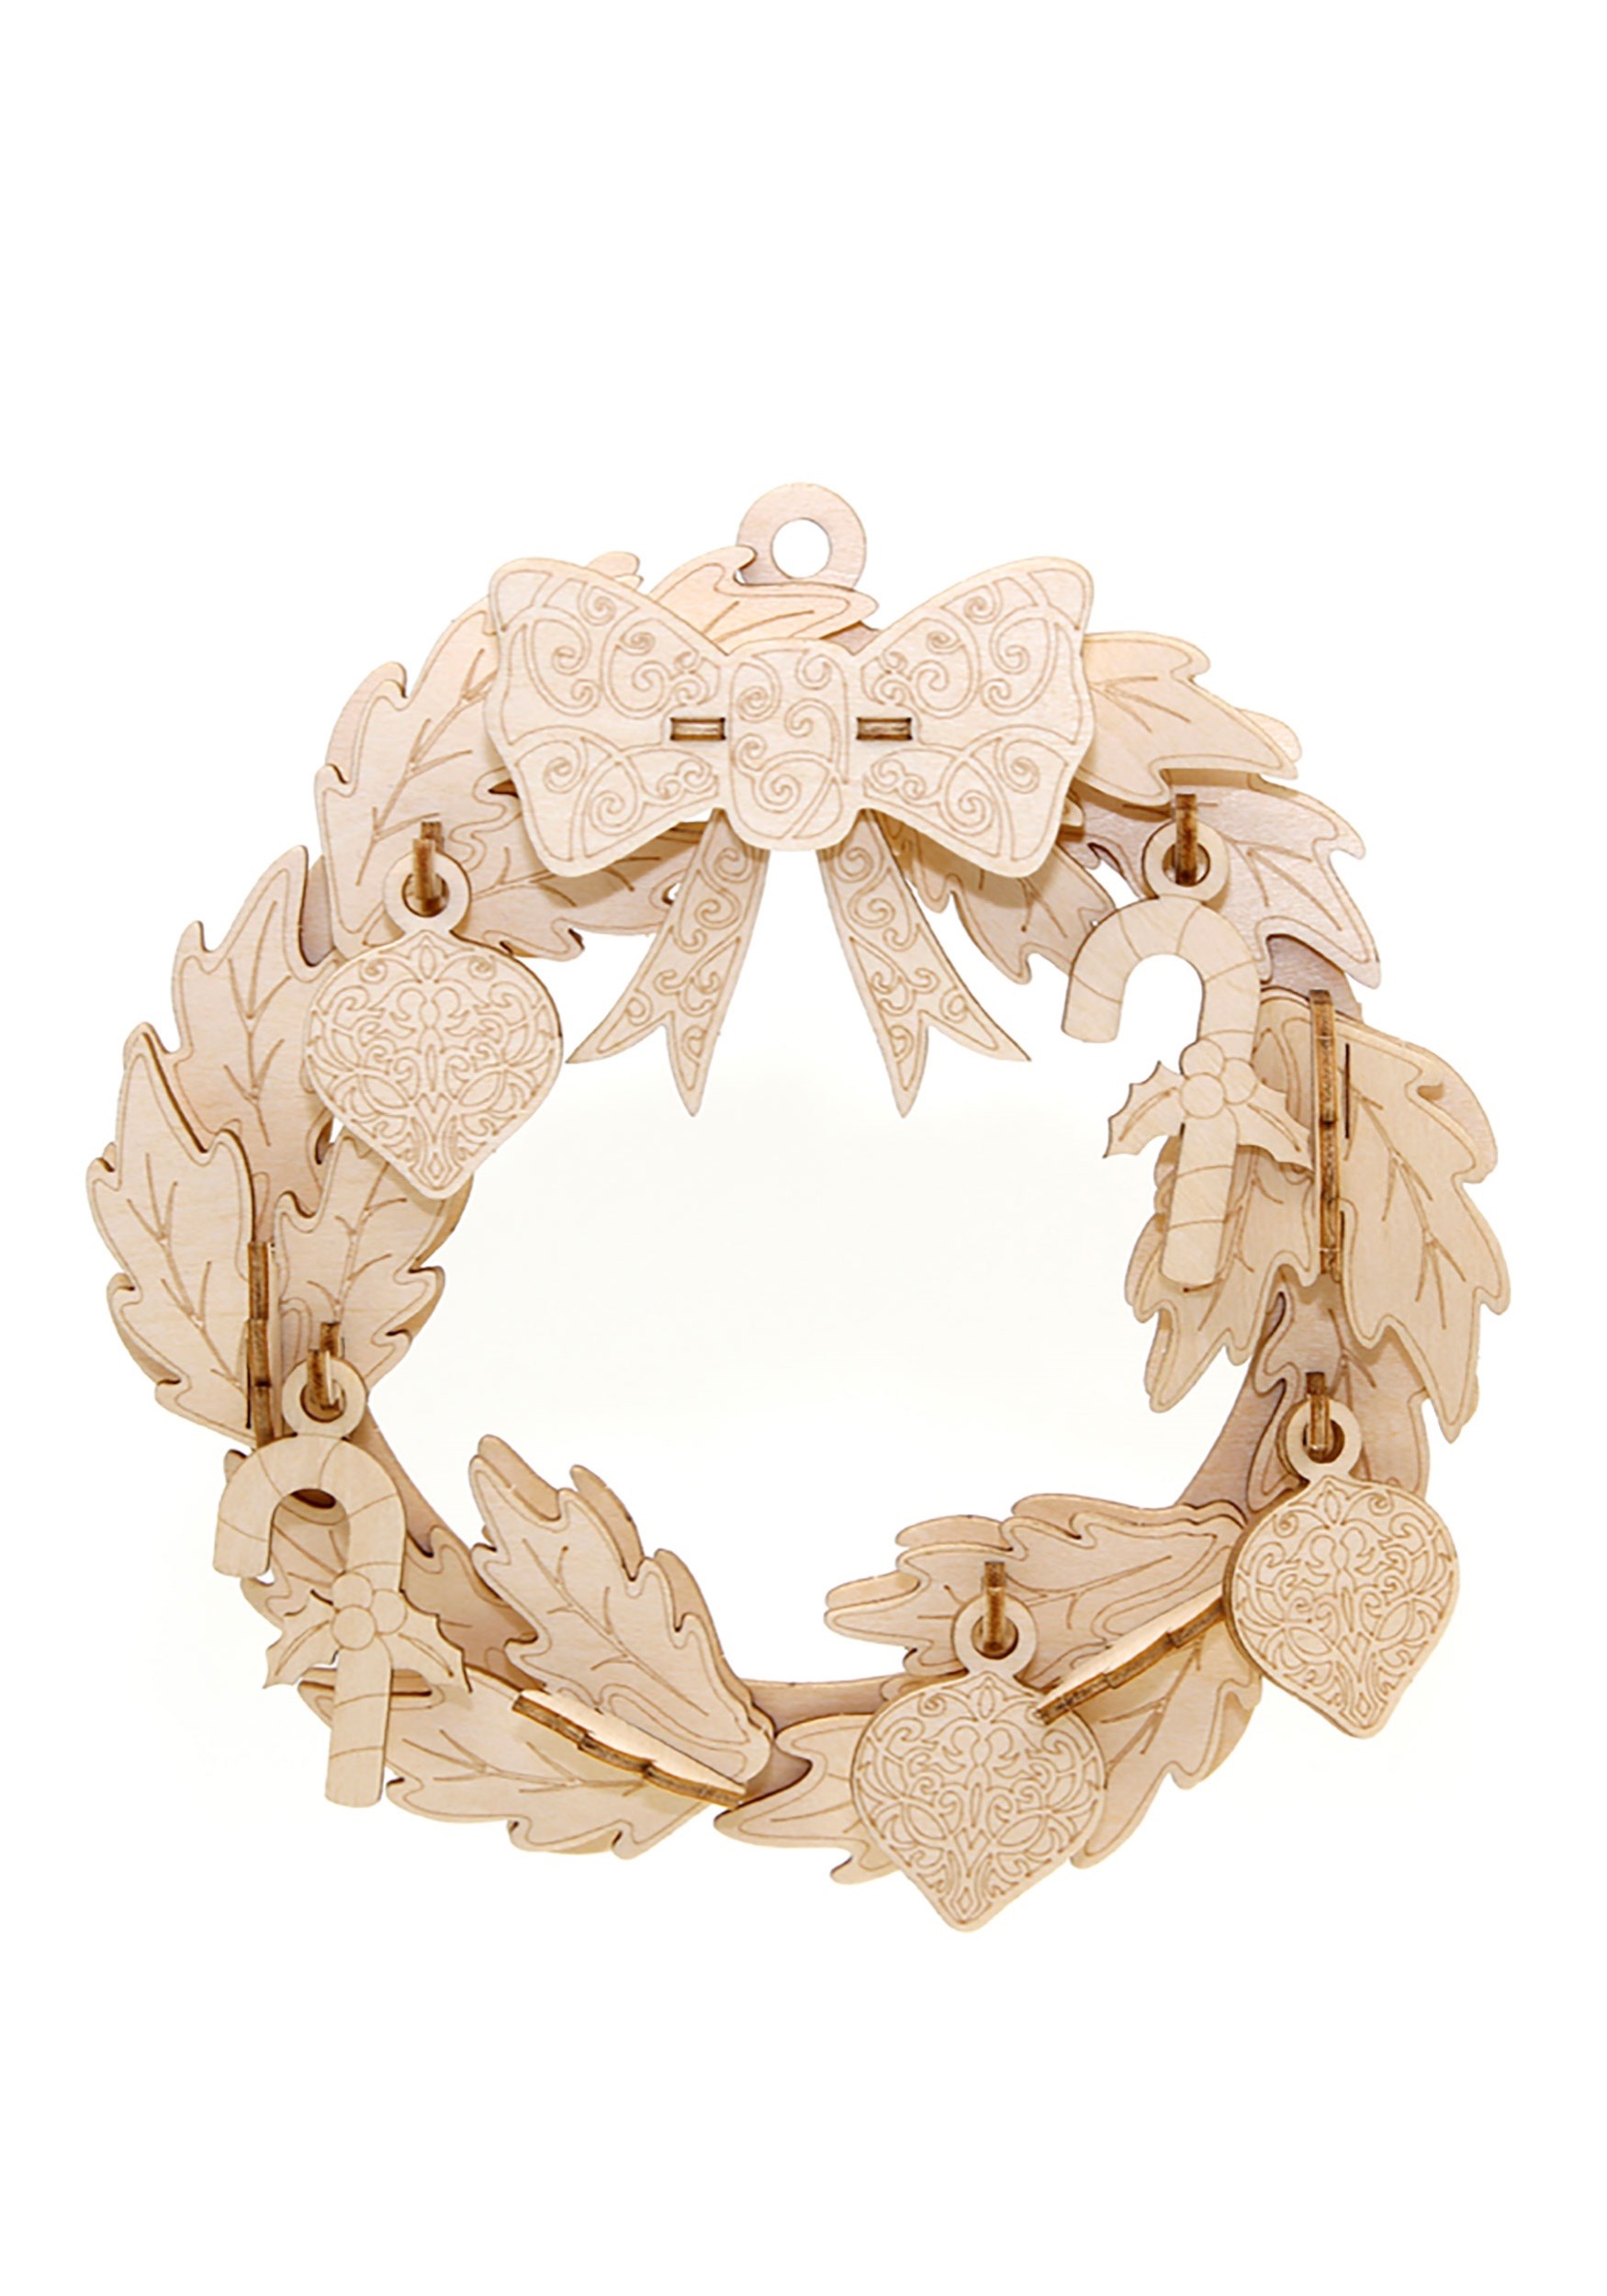 3D Wood Model Christmas Wreath with Background Display